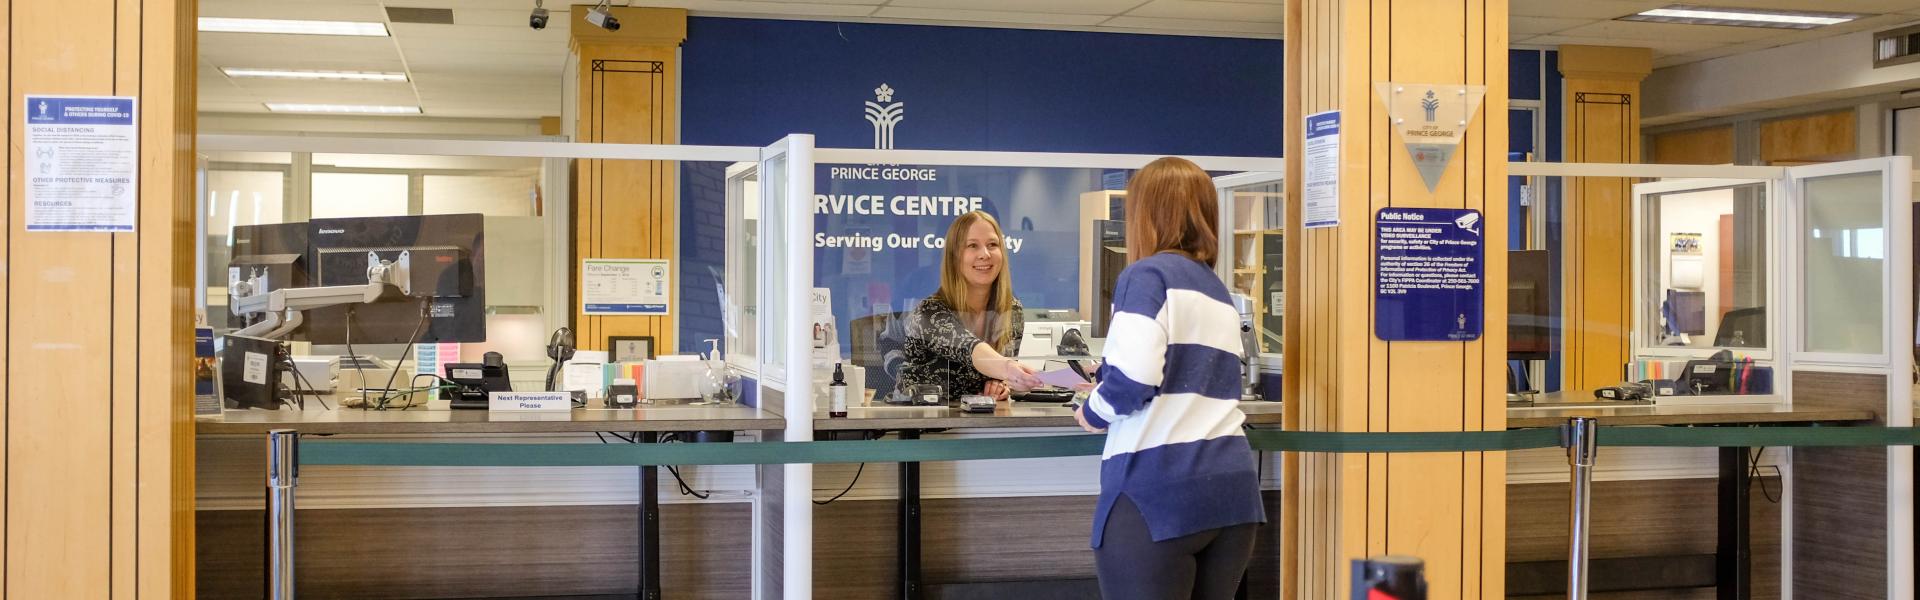 City hall service centre with customer being assisted by a member of the service centre staff